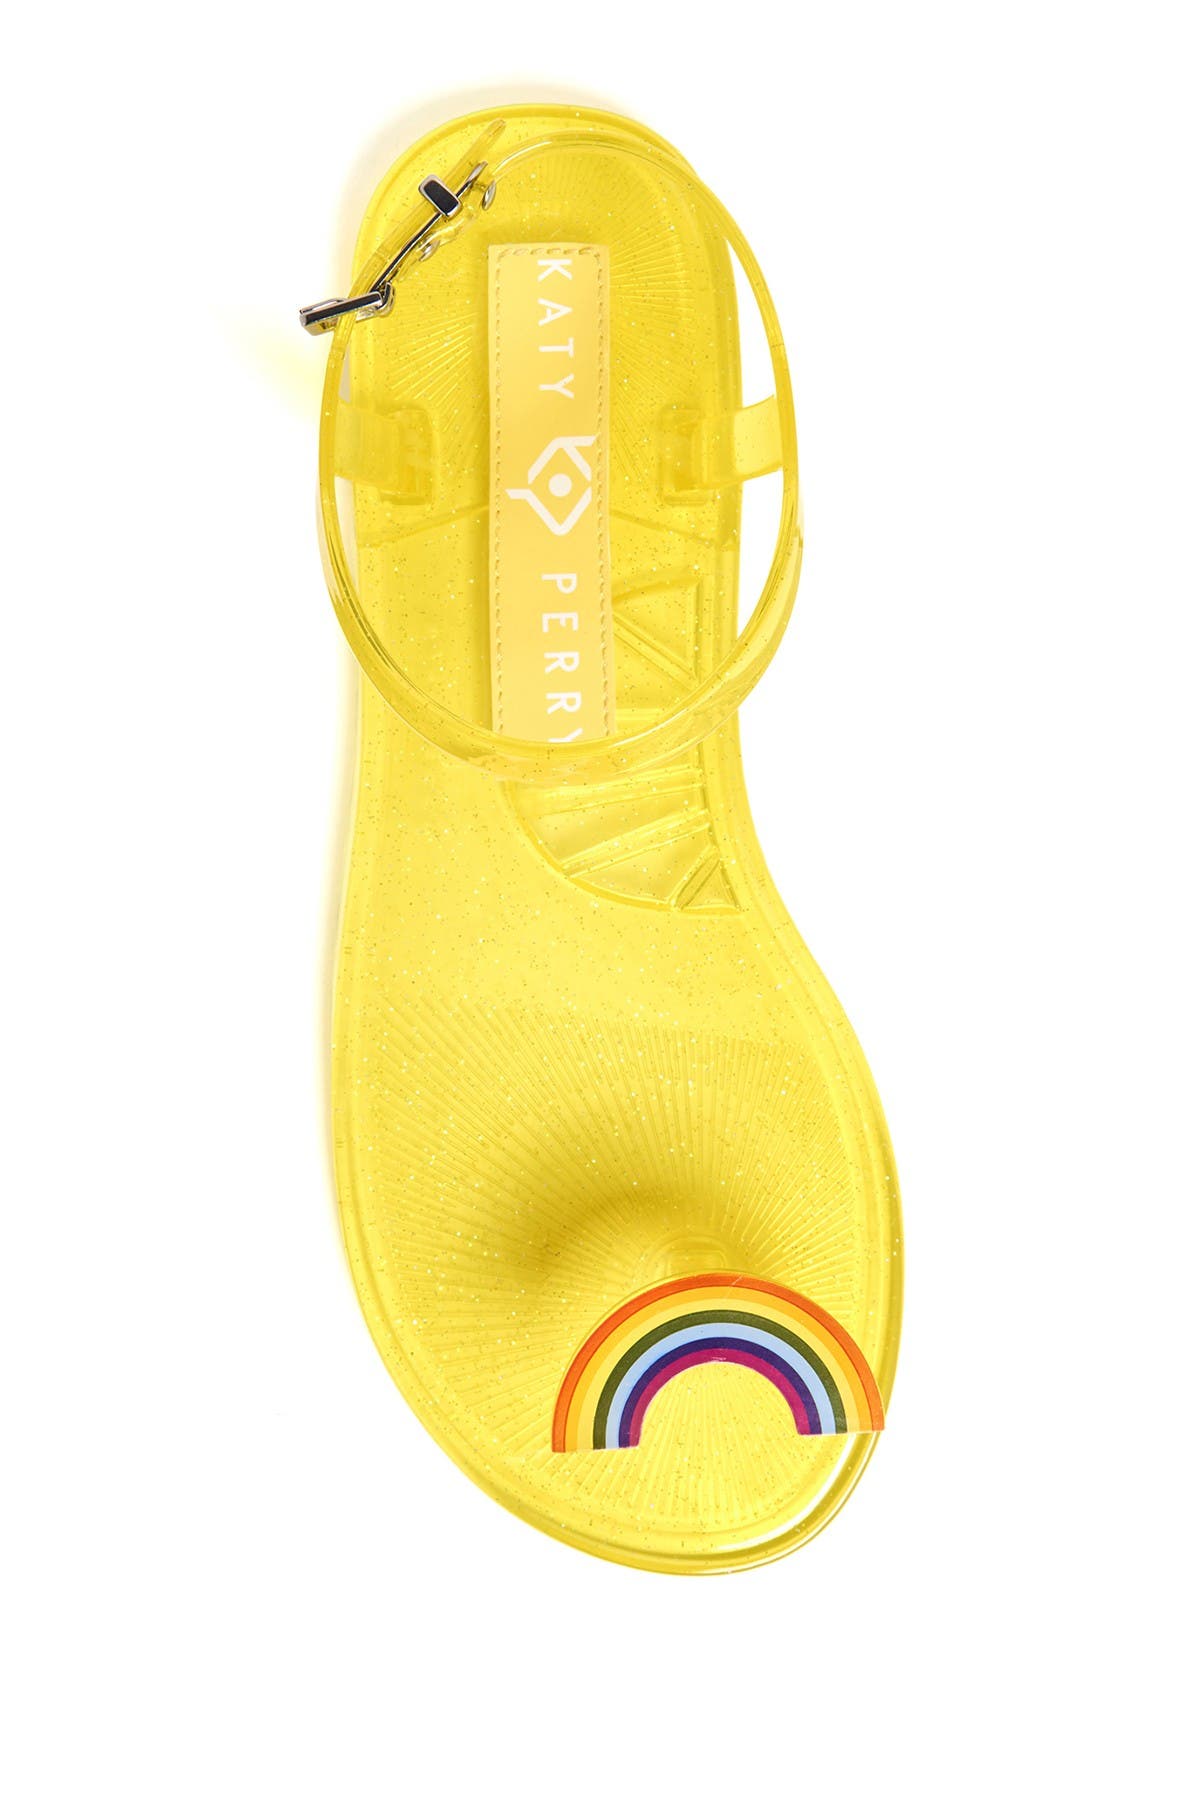 katy perry jelly sandals sale